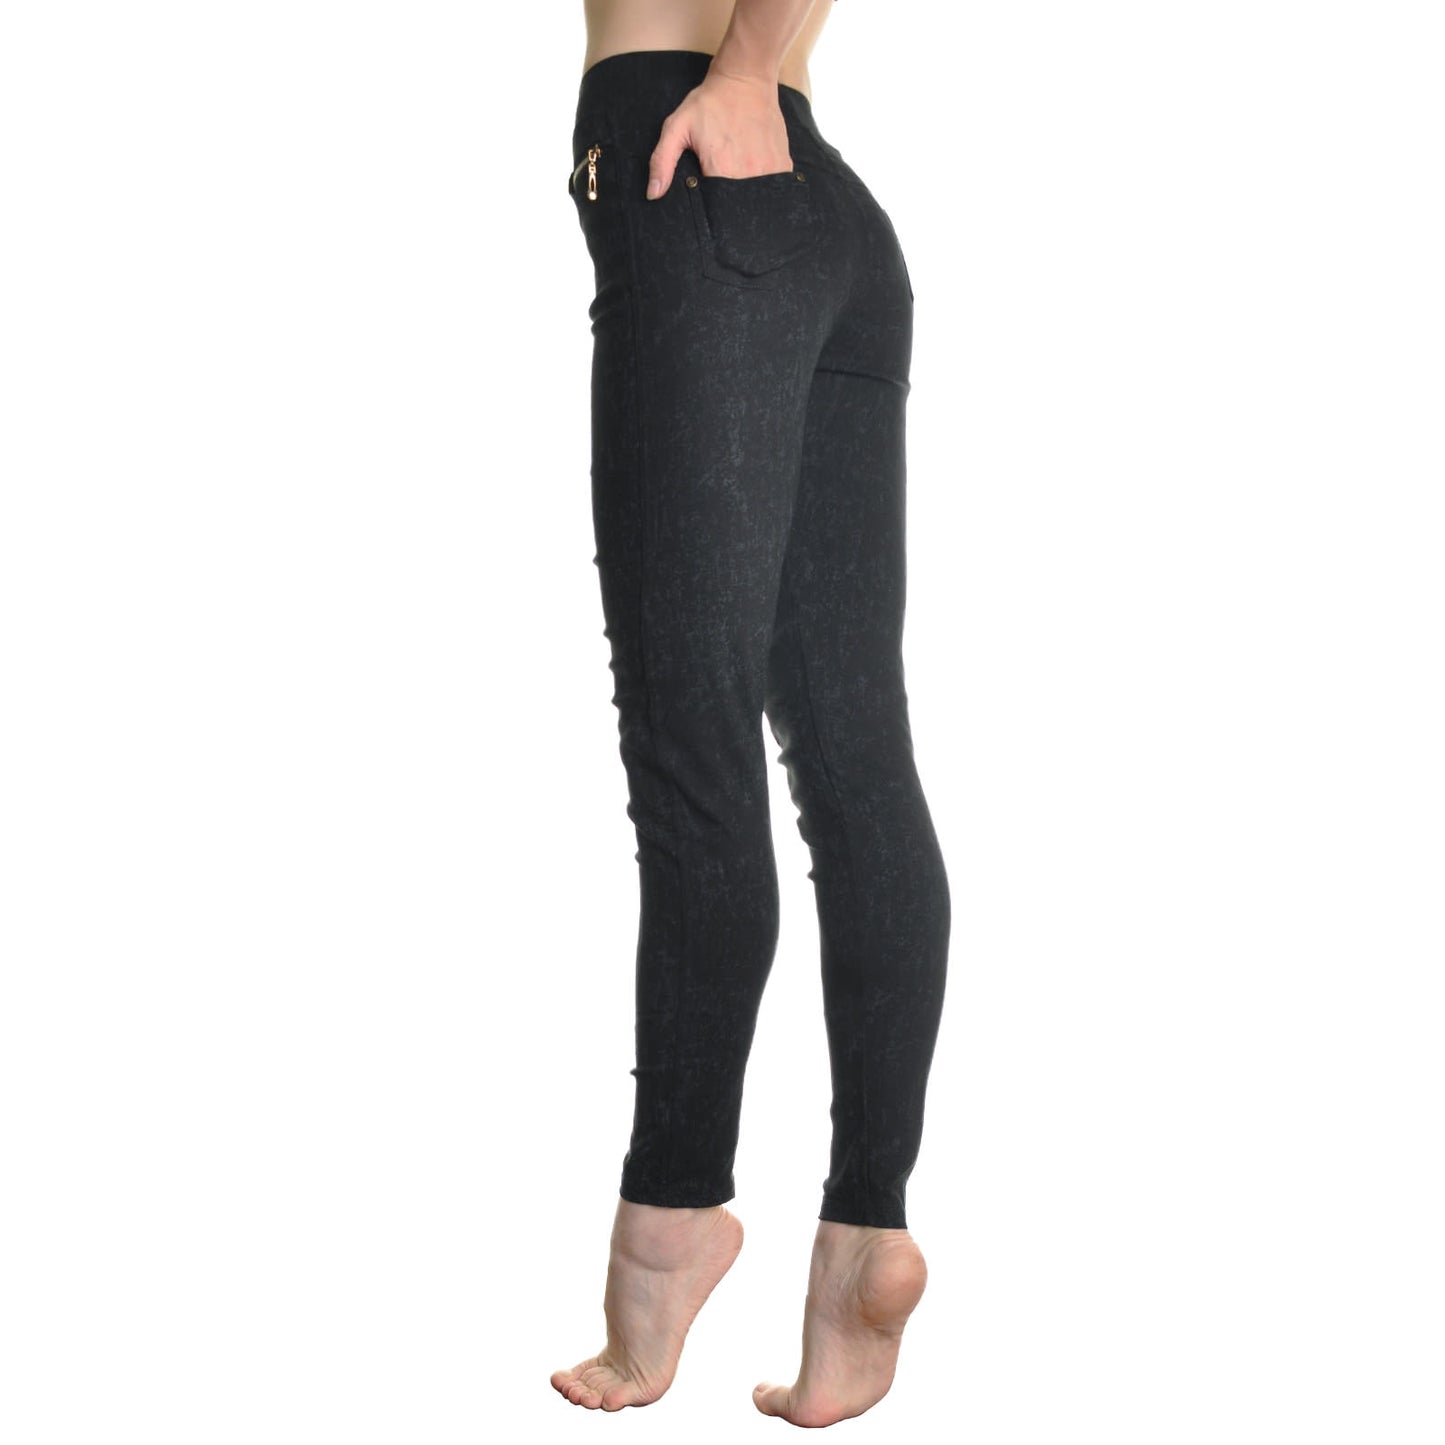 Cotton Blend Black Jegging with Pockets and Zipper Detail (1-Pack)